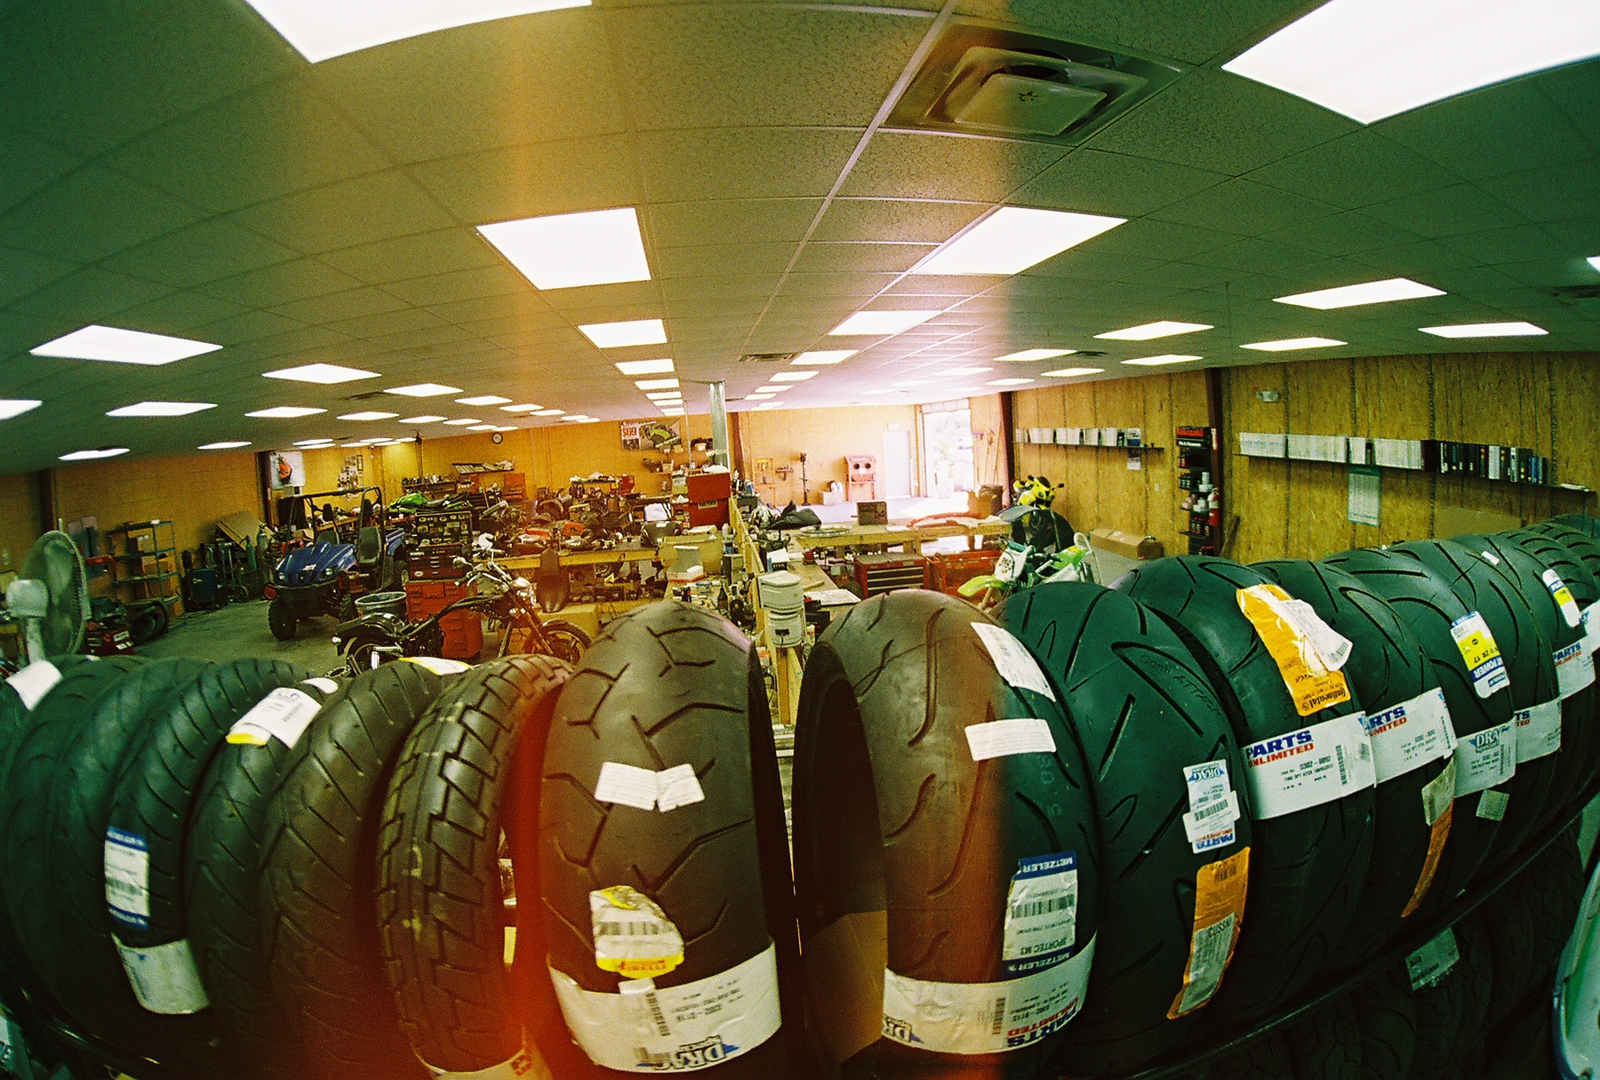 Row of powersports tired inside a workshop with an open door in the back right of the room.